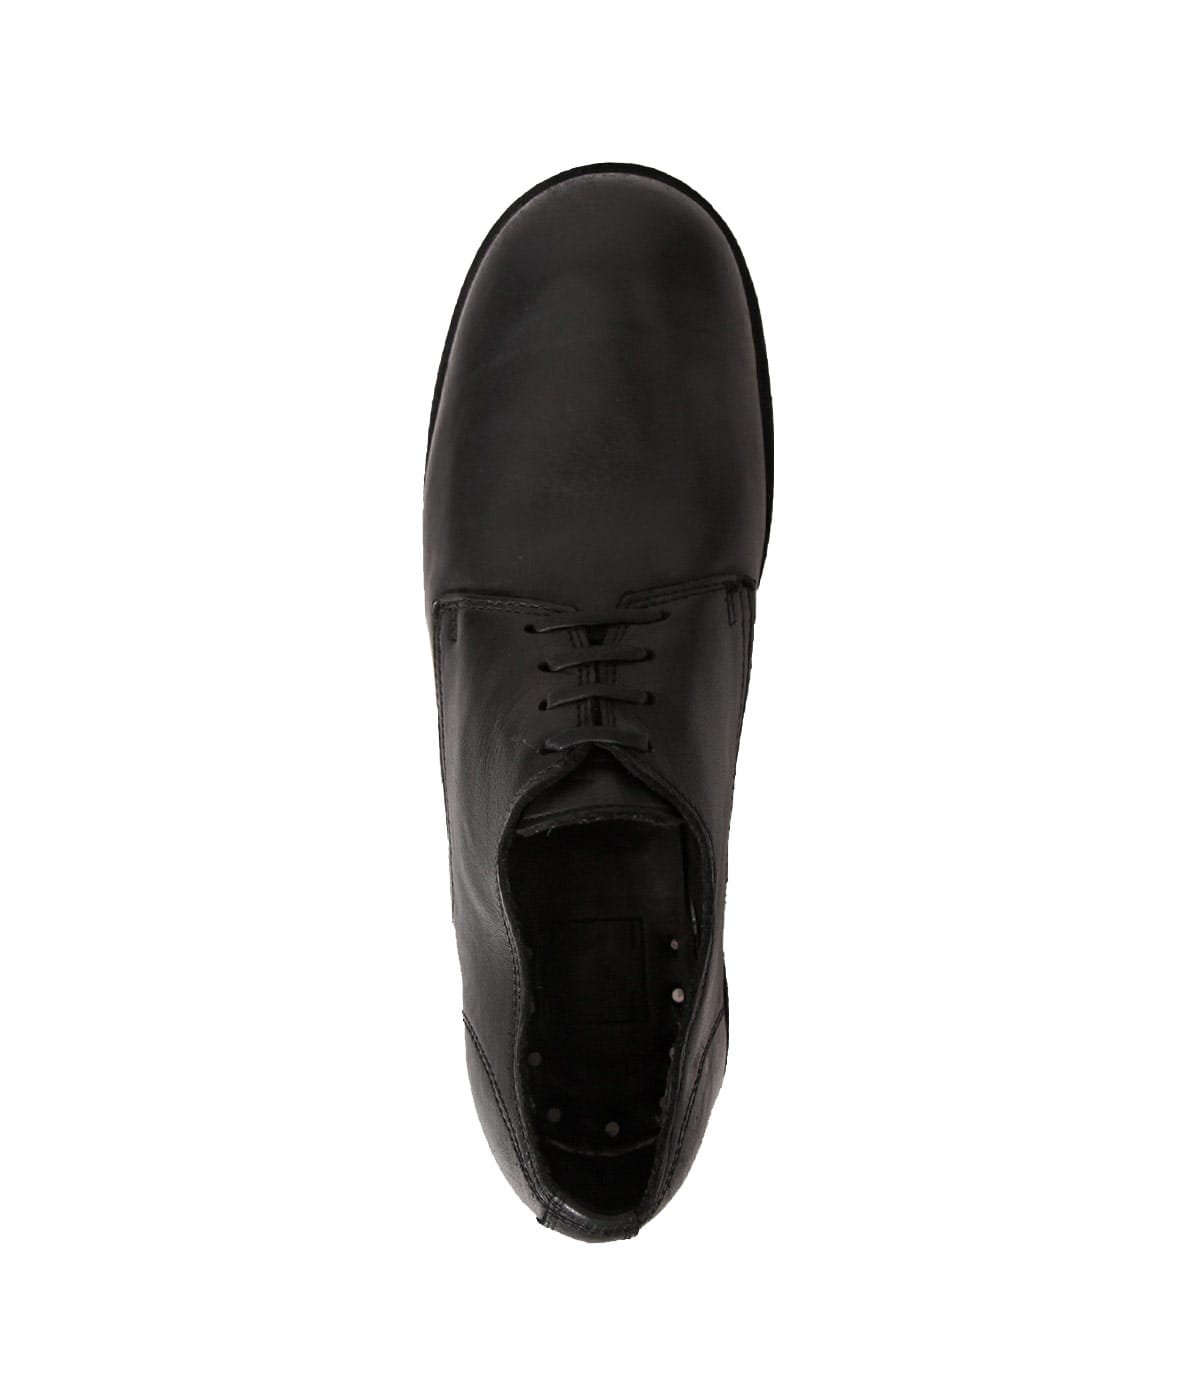 CLASSIC DERBY SHOES